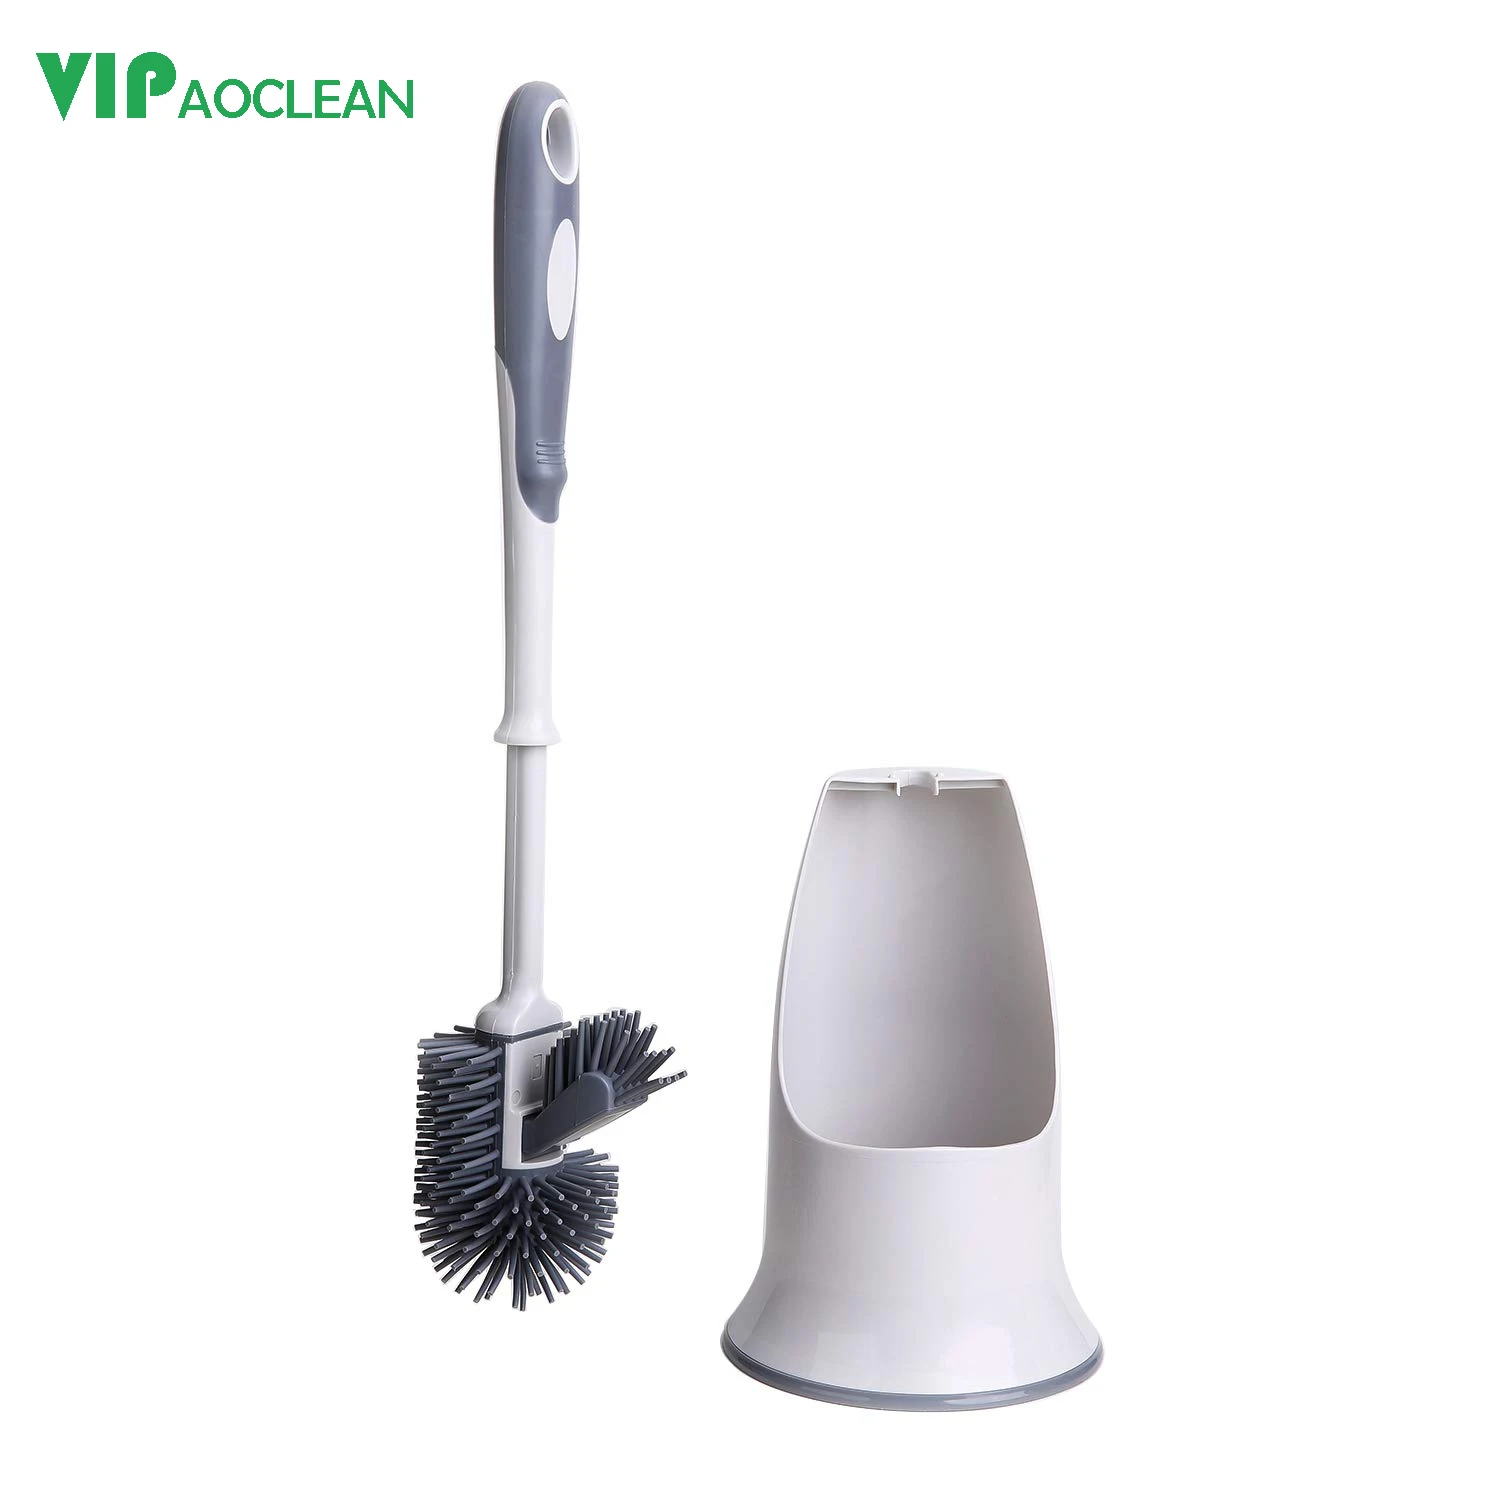 VIPaoclean silicone toilet brush set bathroom toilet brush and holder set